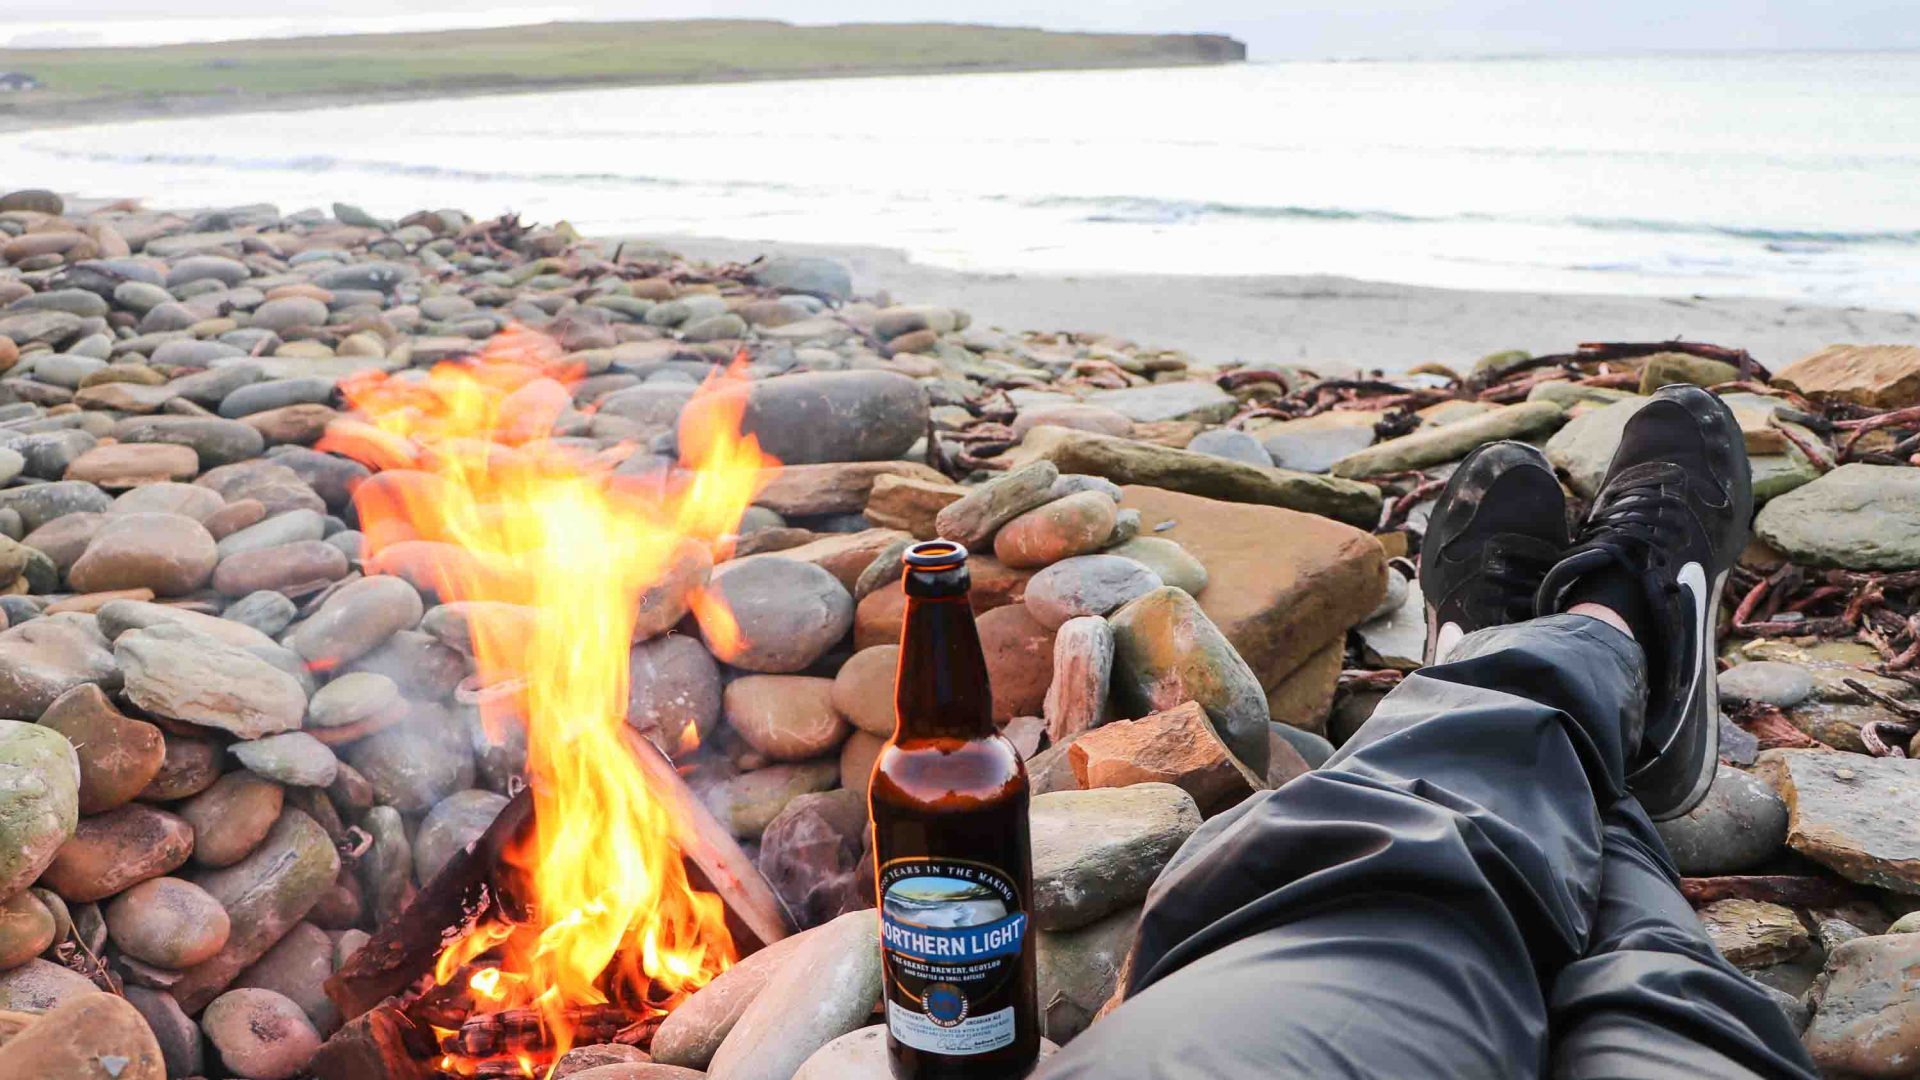 A beer bottle resting on legs alongside a small fire, with views of a lake.